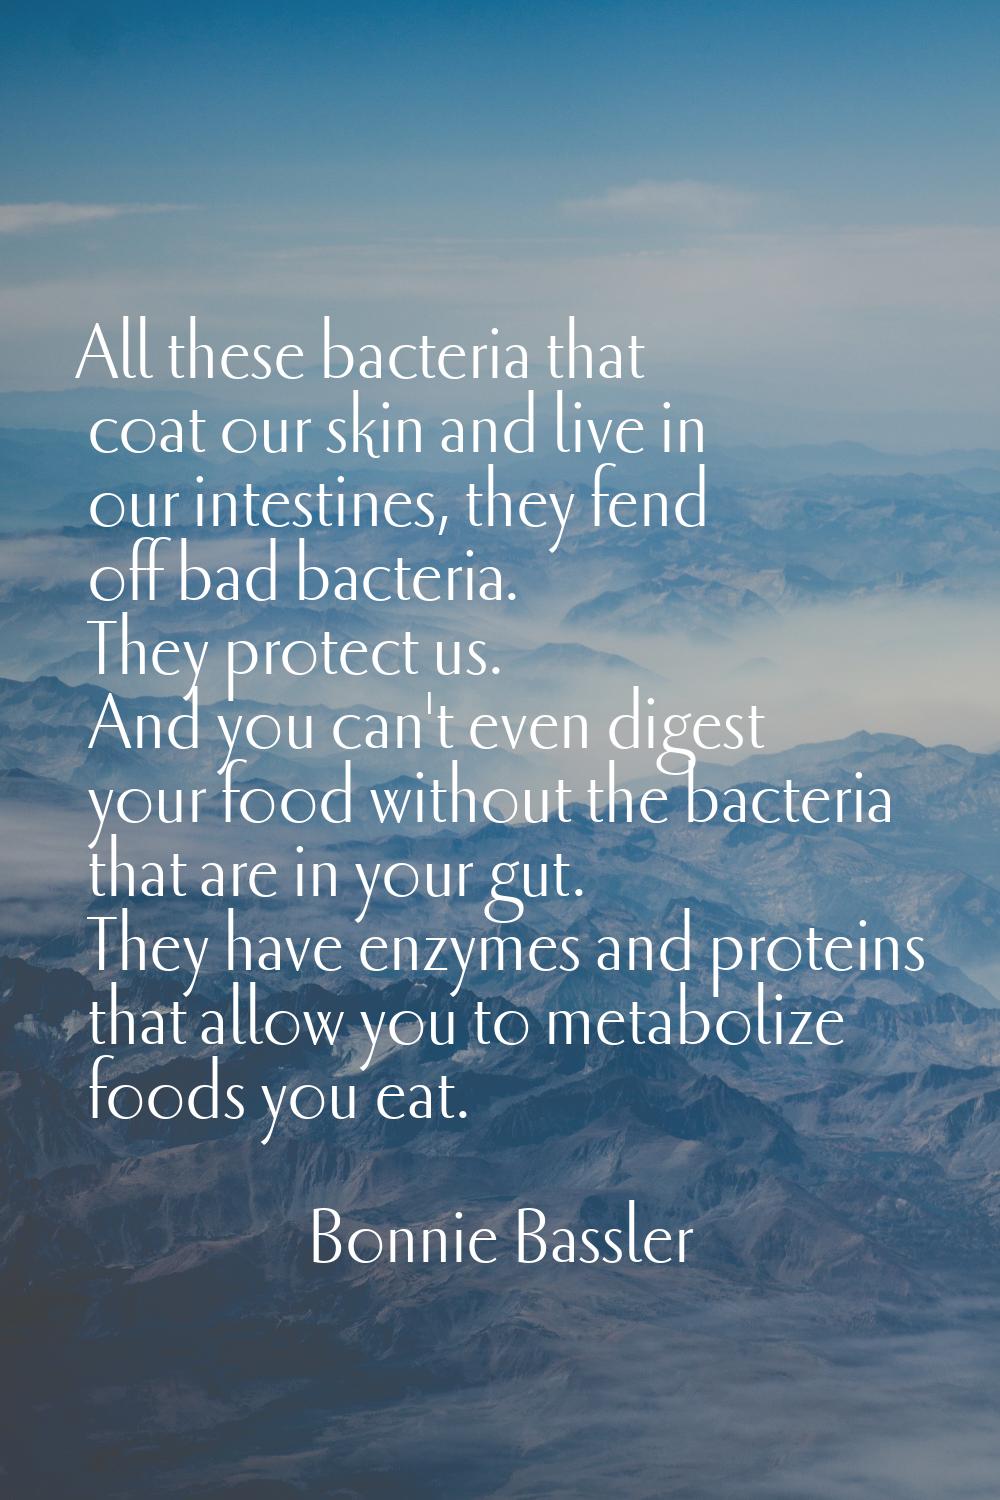 All these bacteria that coat our skin and live in our intestines, they fend off bad bacteria. They 